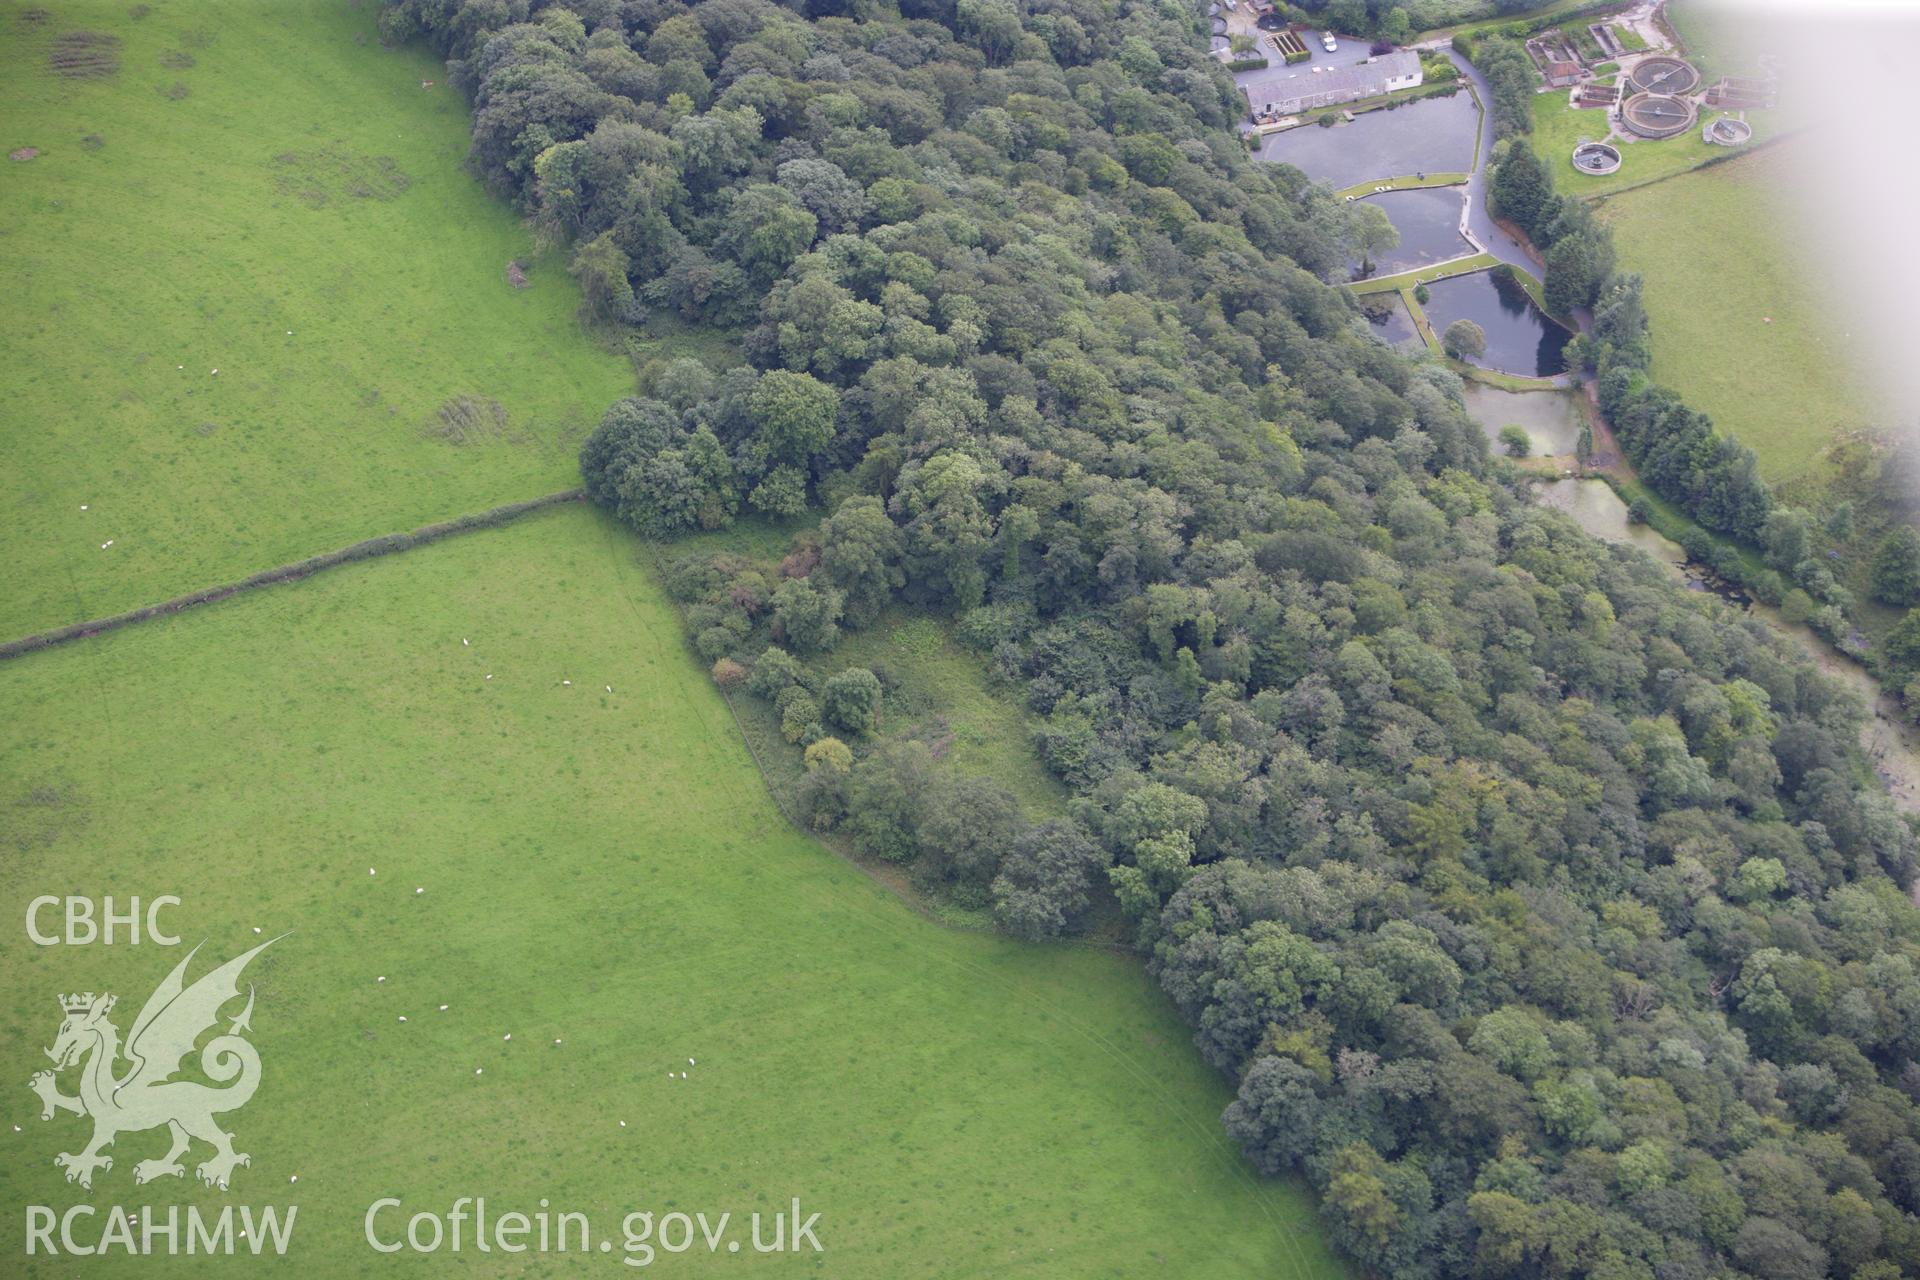 RCAHMW colour oblique aerial photograph of Coed Trefraith Enclosure. Taken on 30 July 2009 by Toby Driver